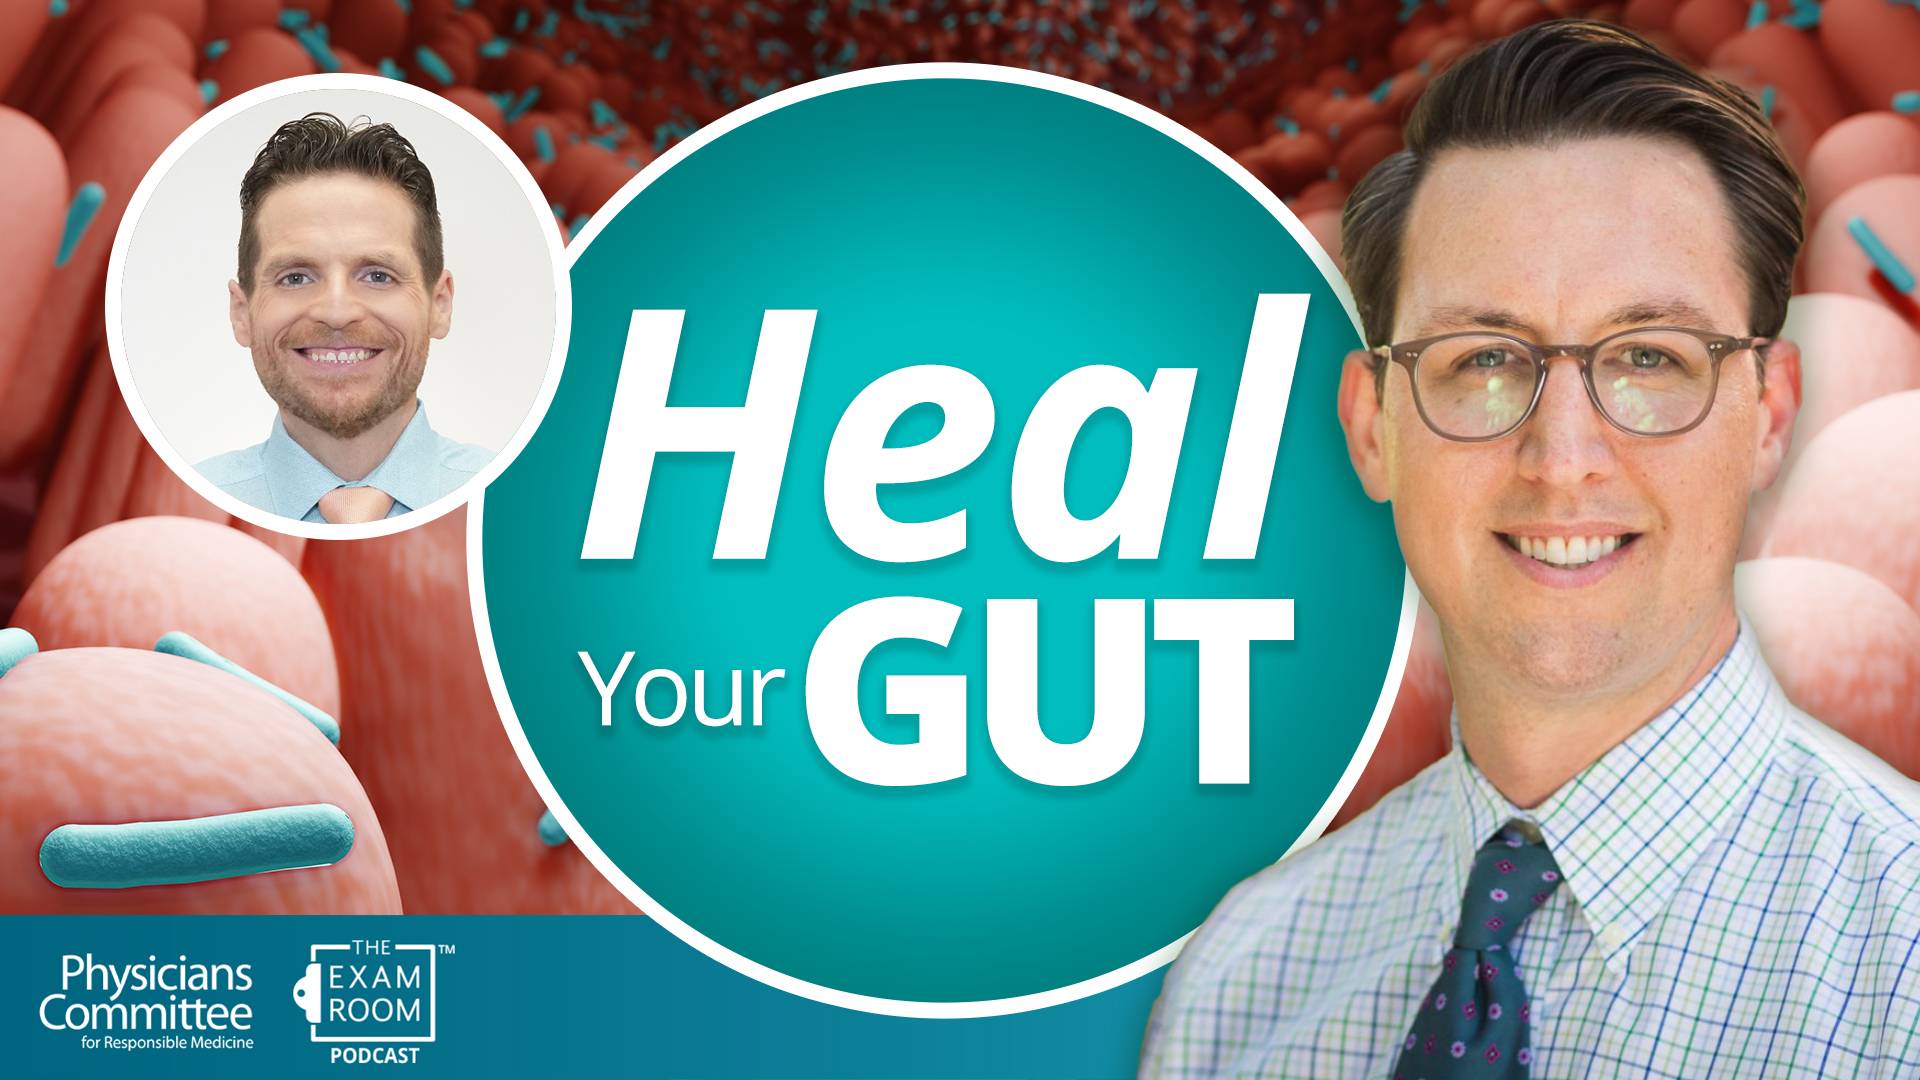 Foods That Heal the Gut | Dr. Will Bulsiewicz Live Q&A